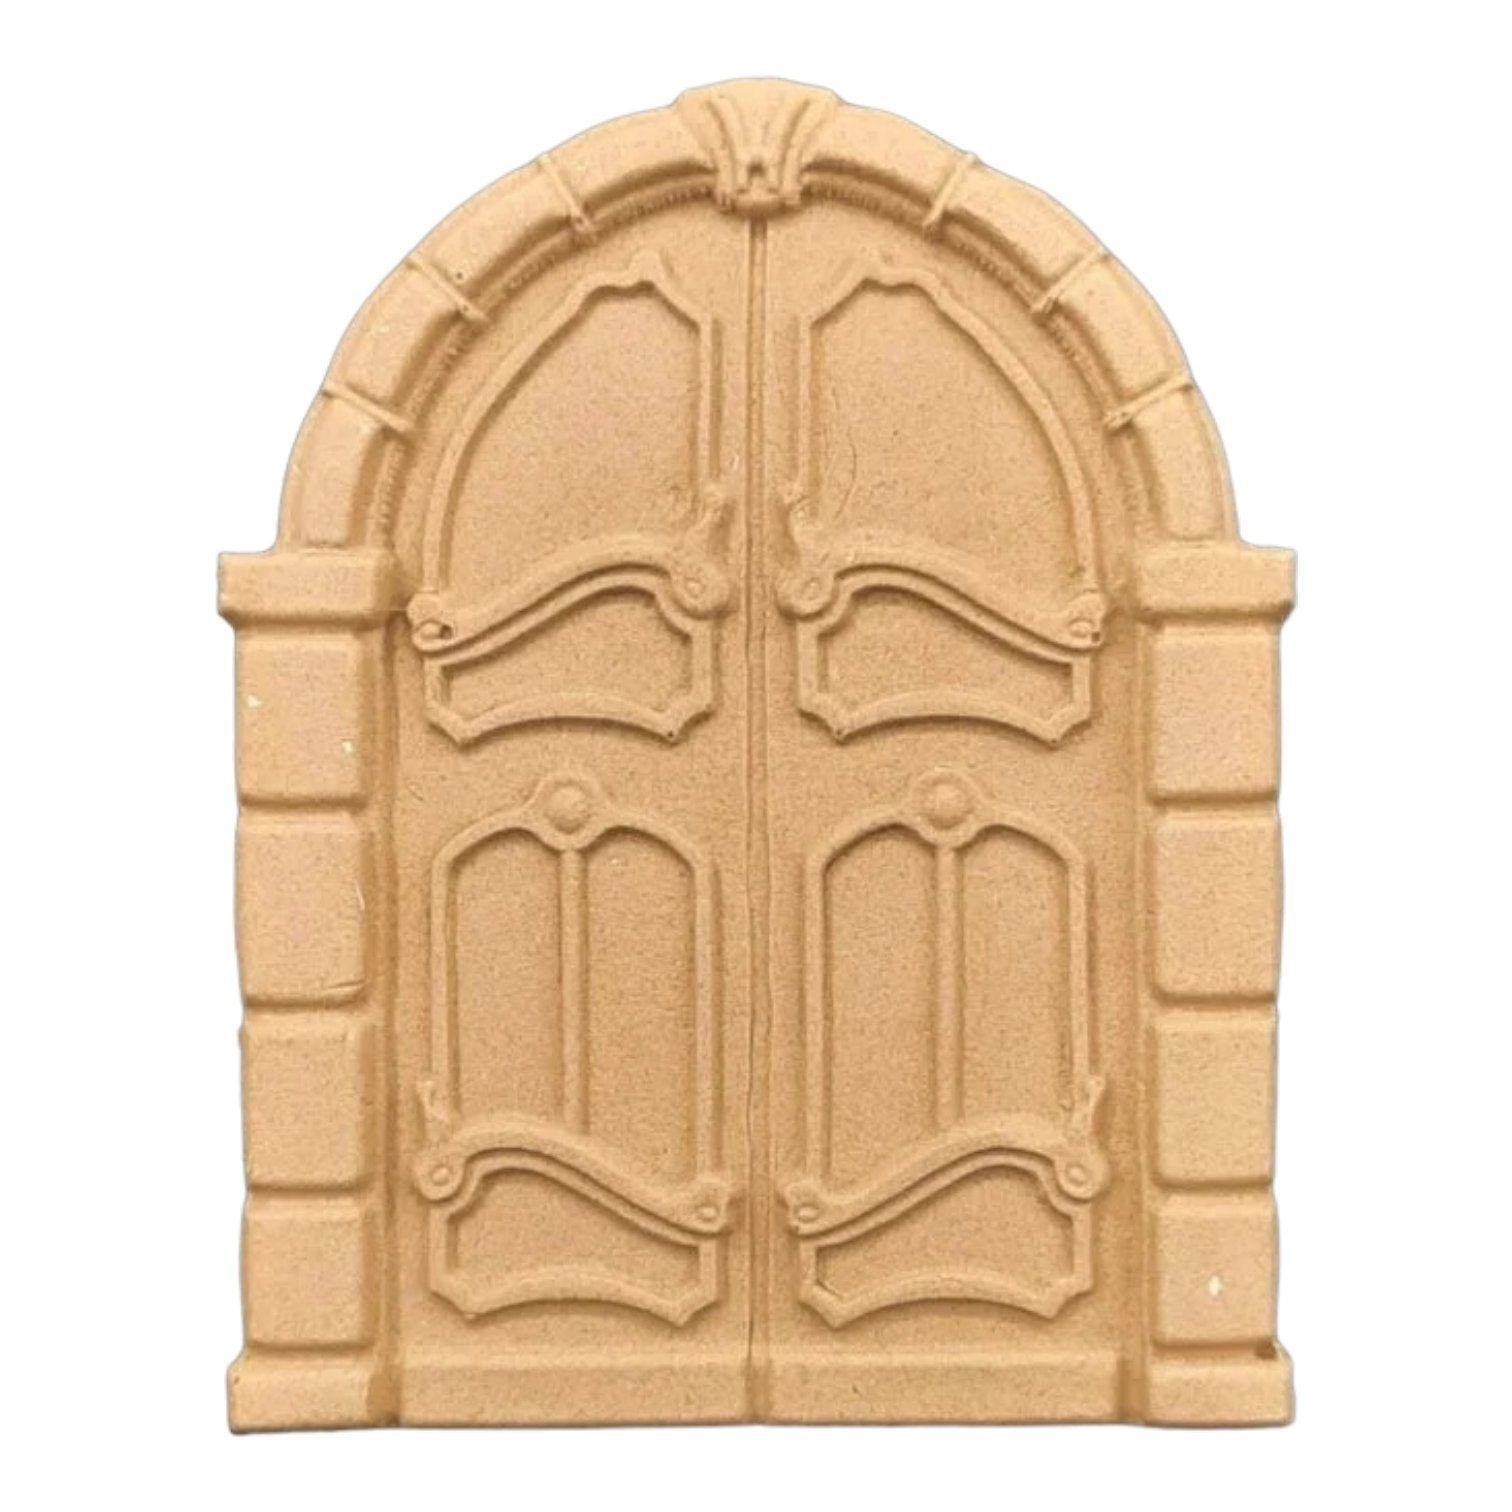 IFW 3601 Door embellishment, great for doll house